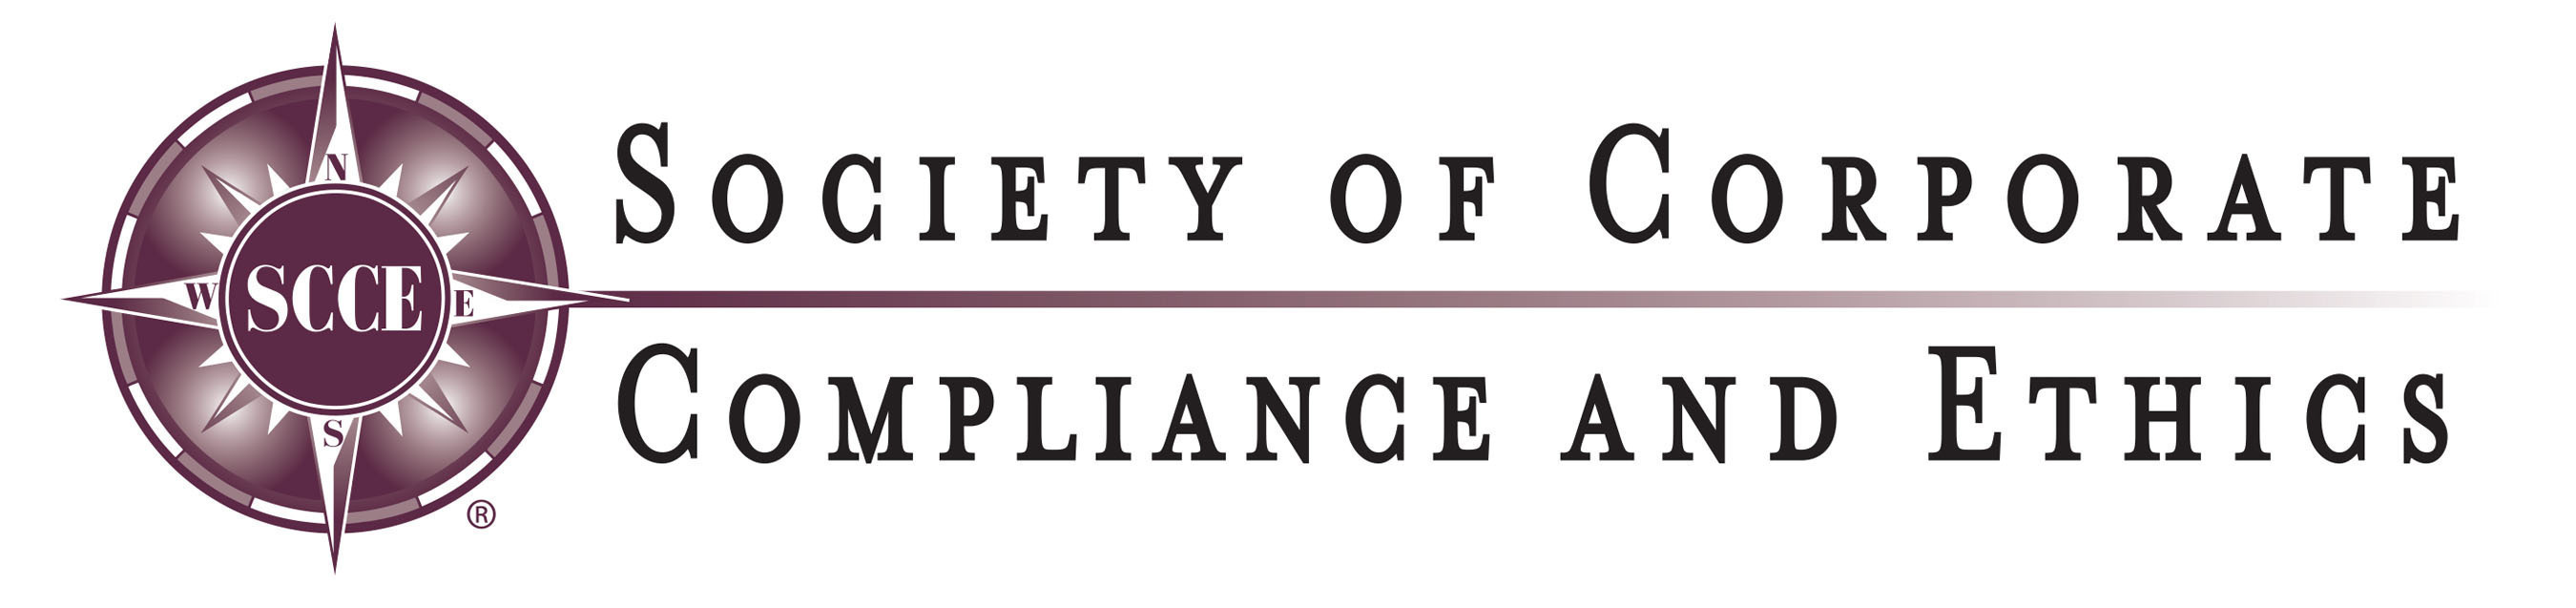 Society of Corporate Compliance and Ethics logo